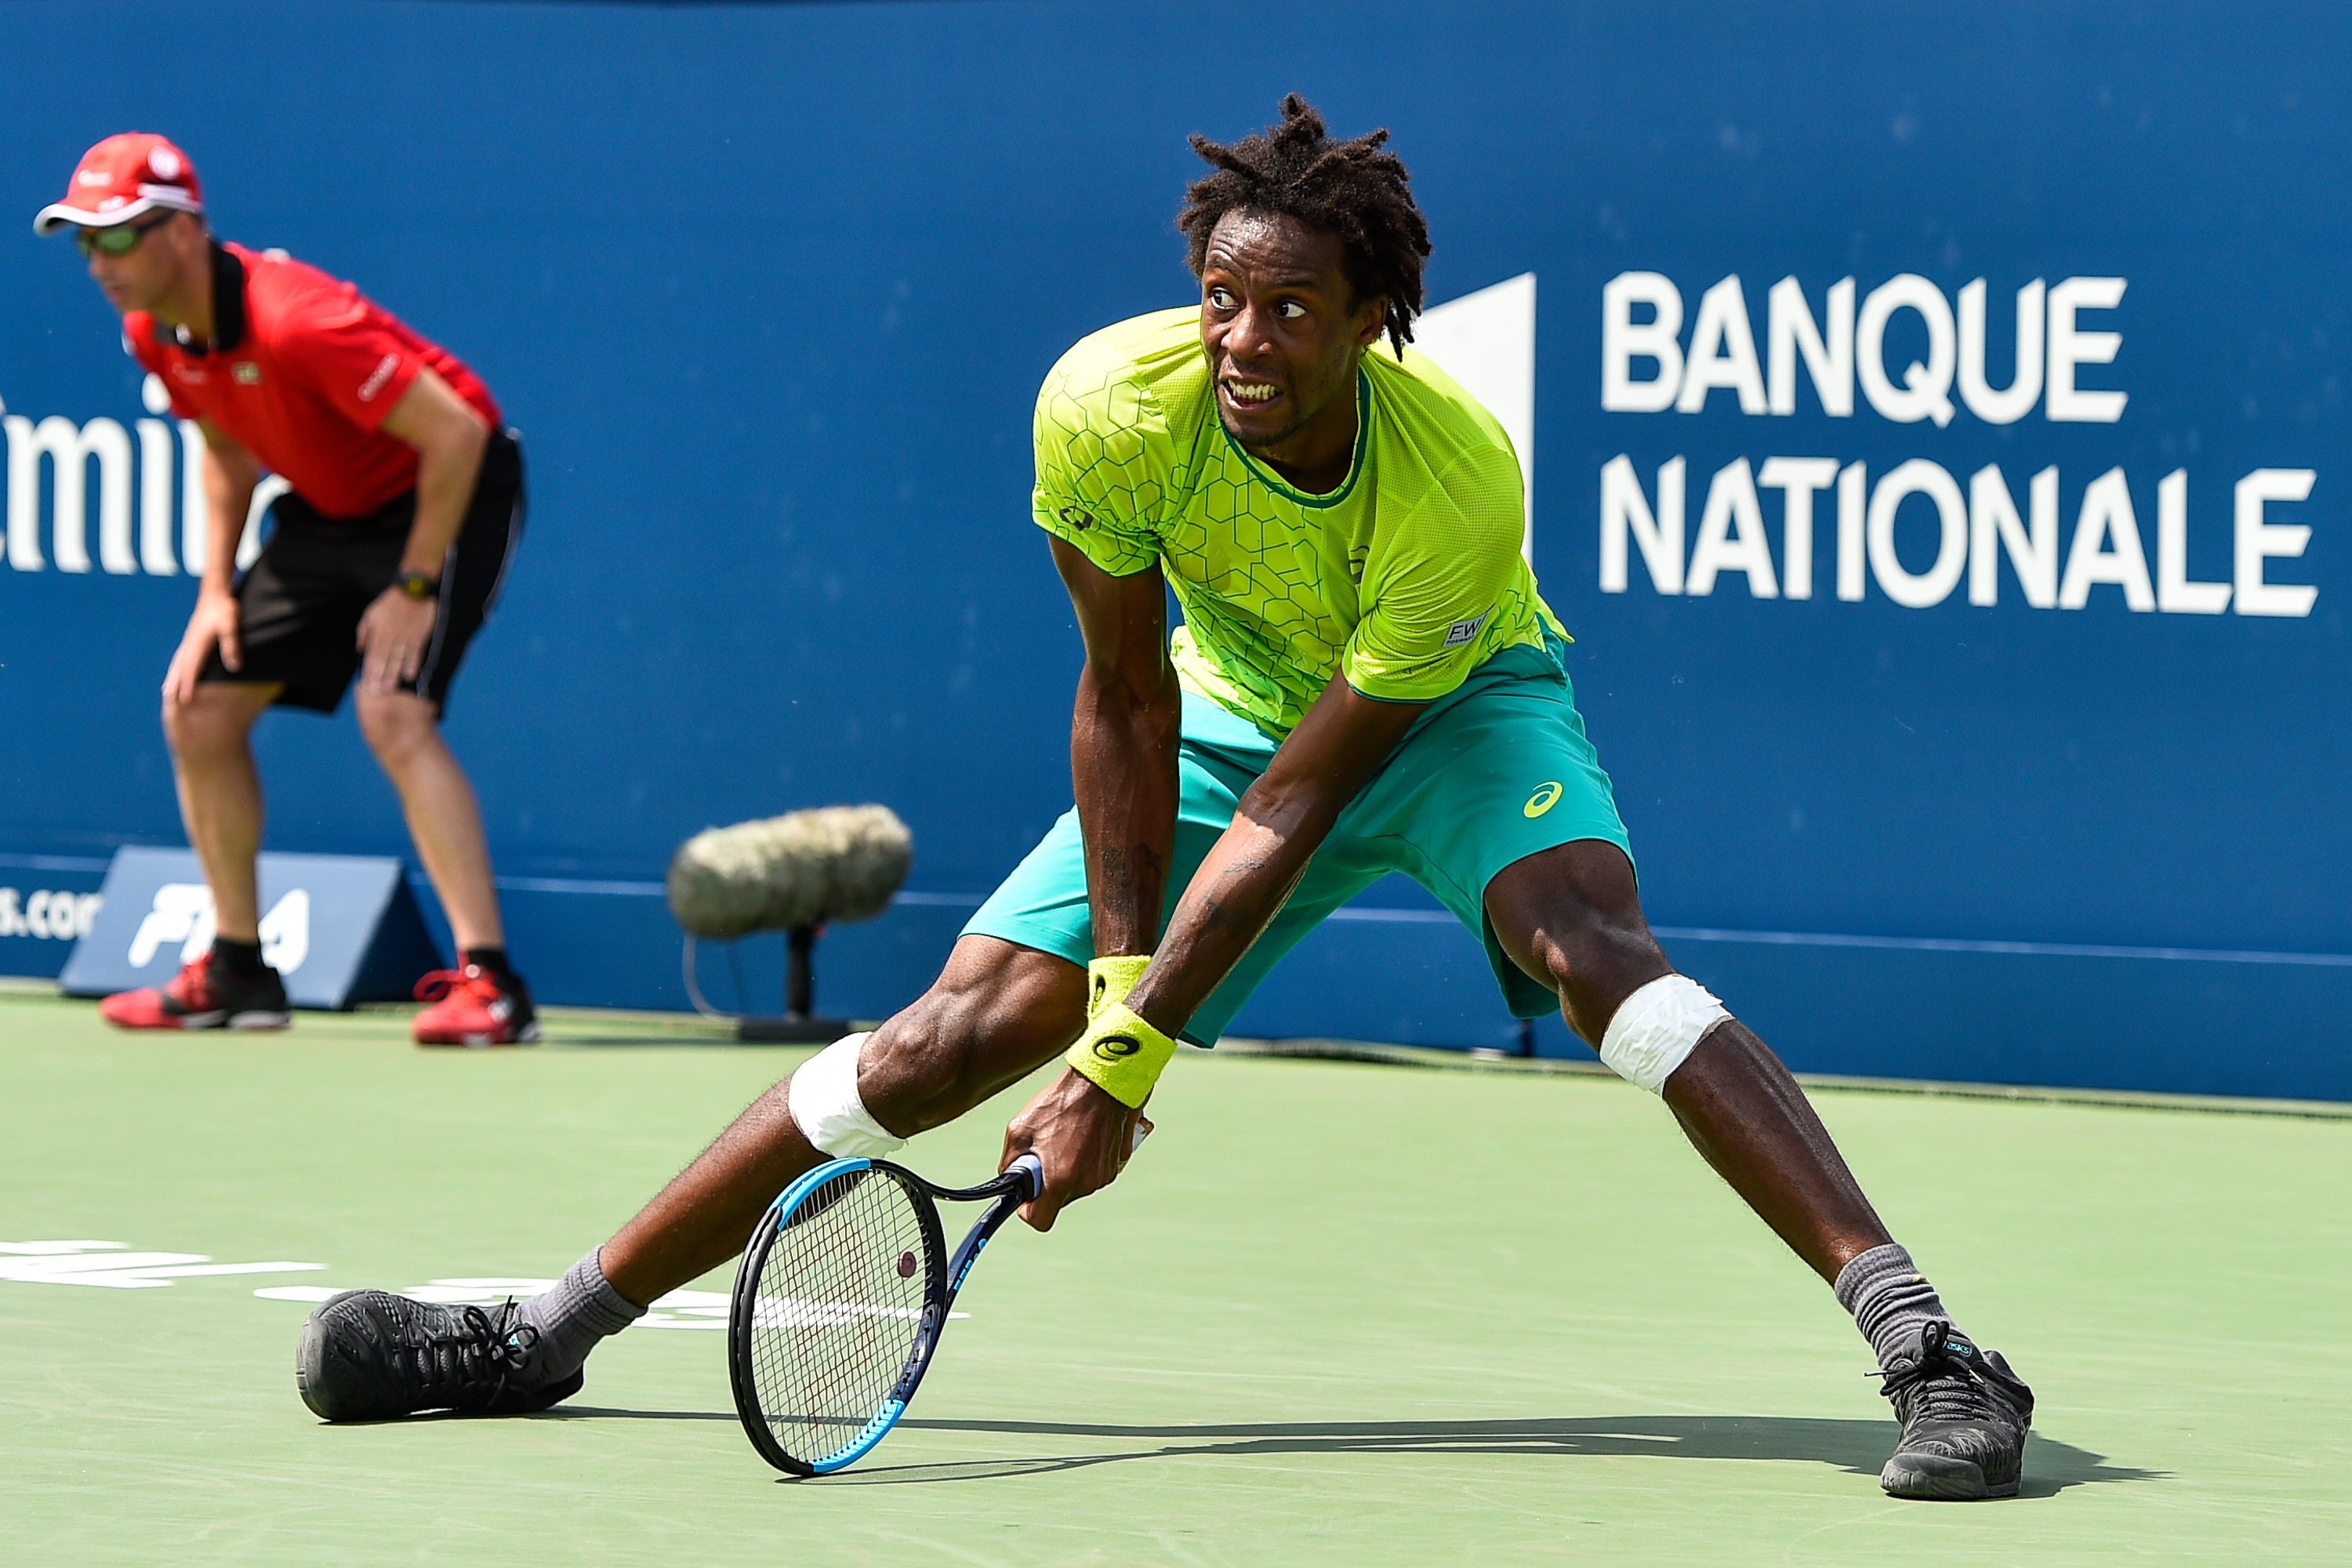 Monfils' run is over, but we’ll always have the Miracle of Montreal